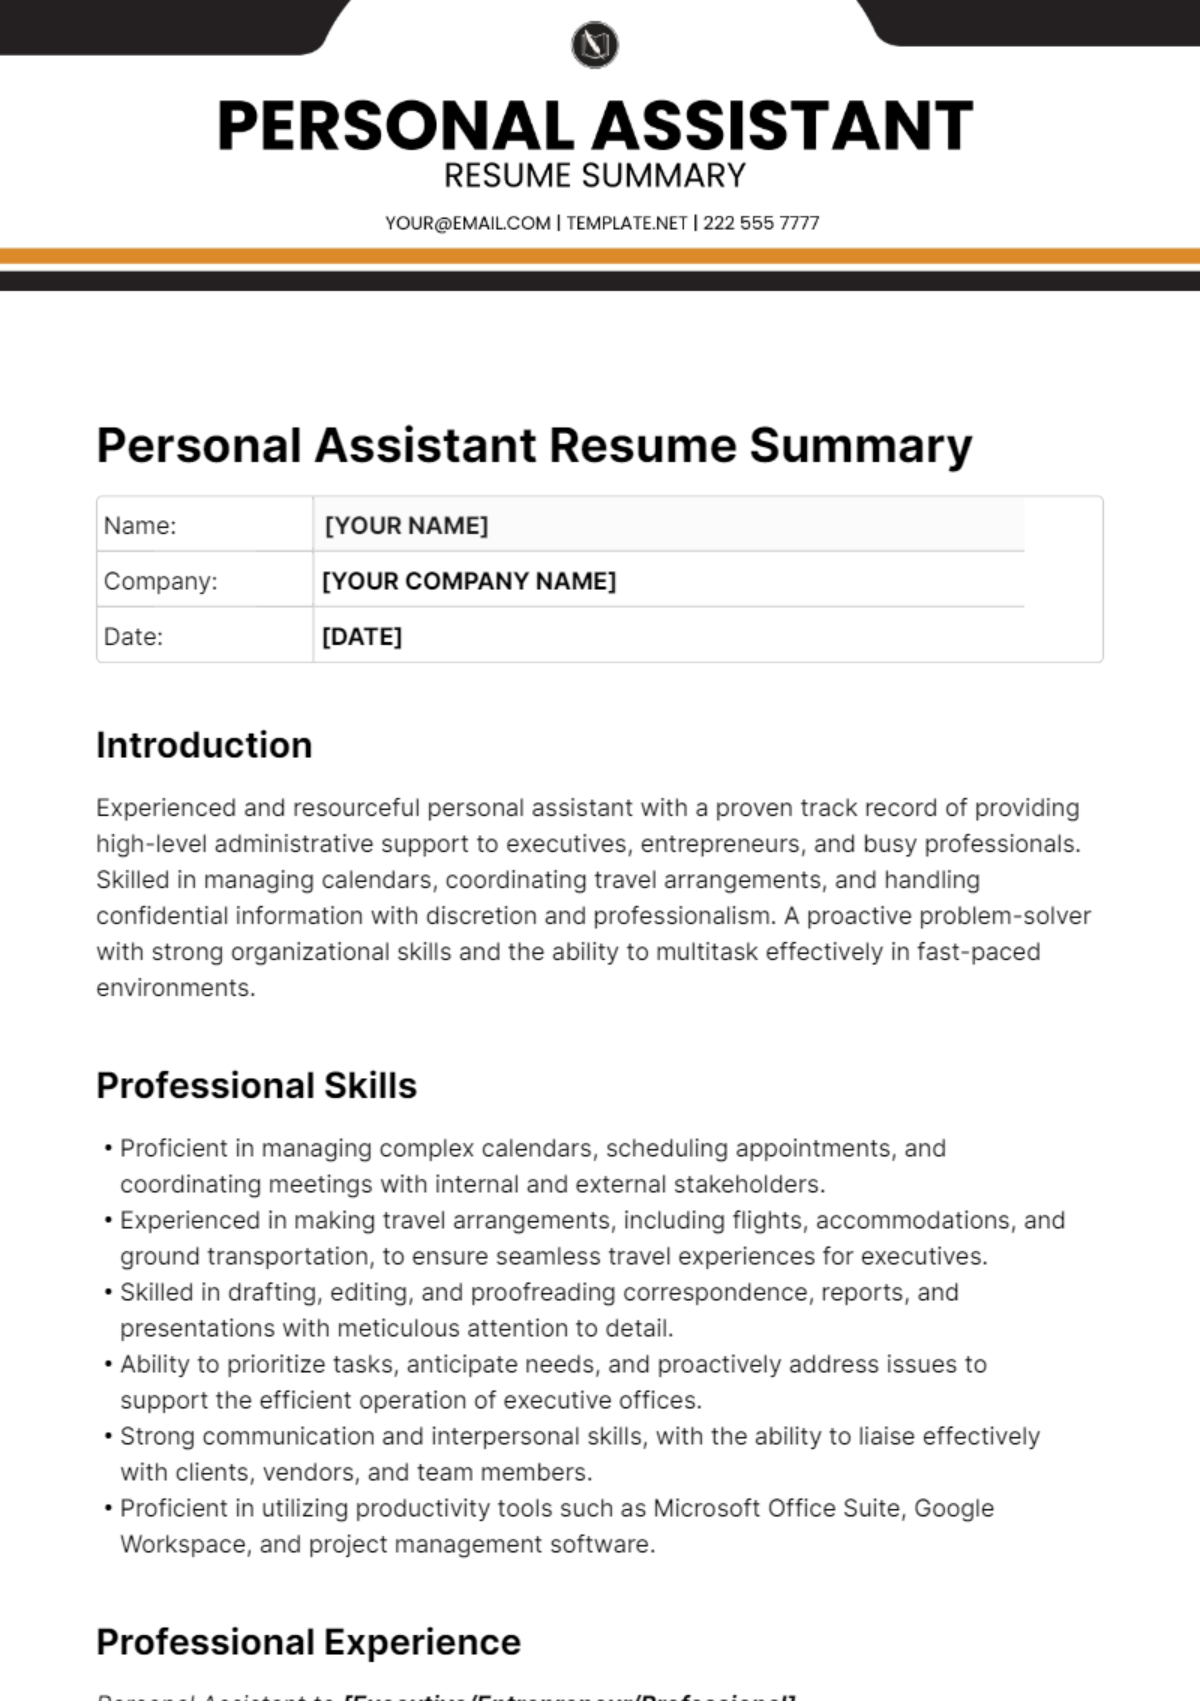 Free Personal Assistant Resume Summary Template